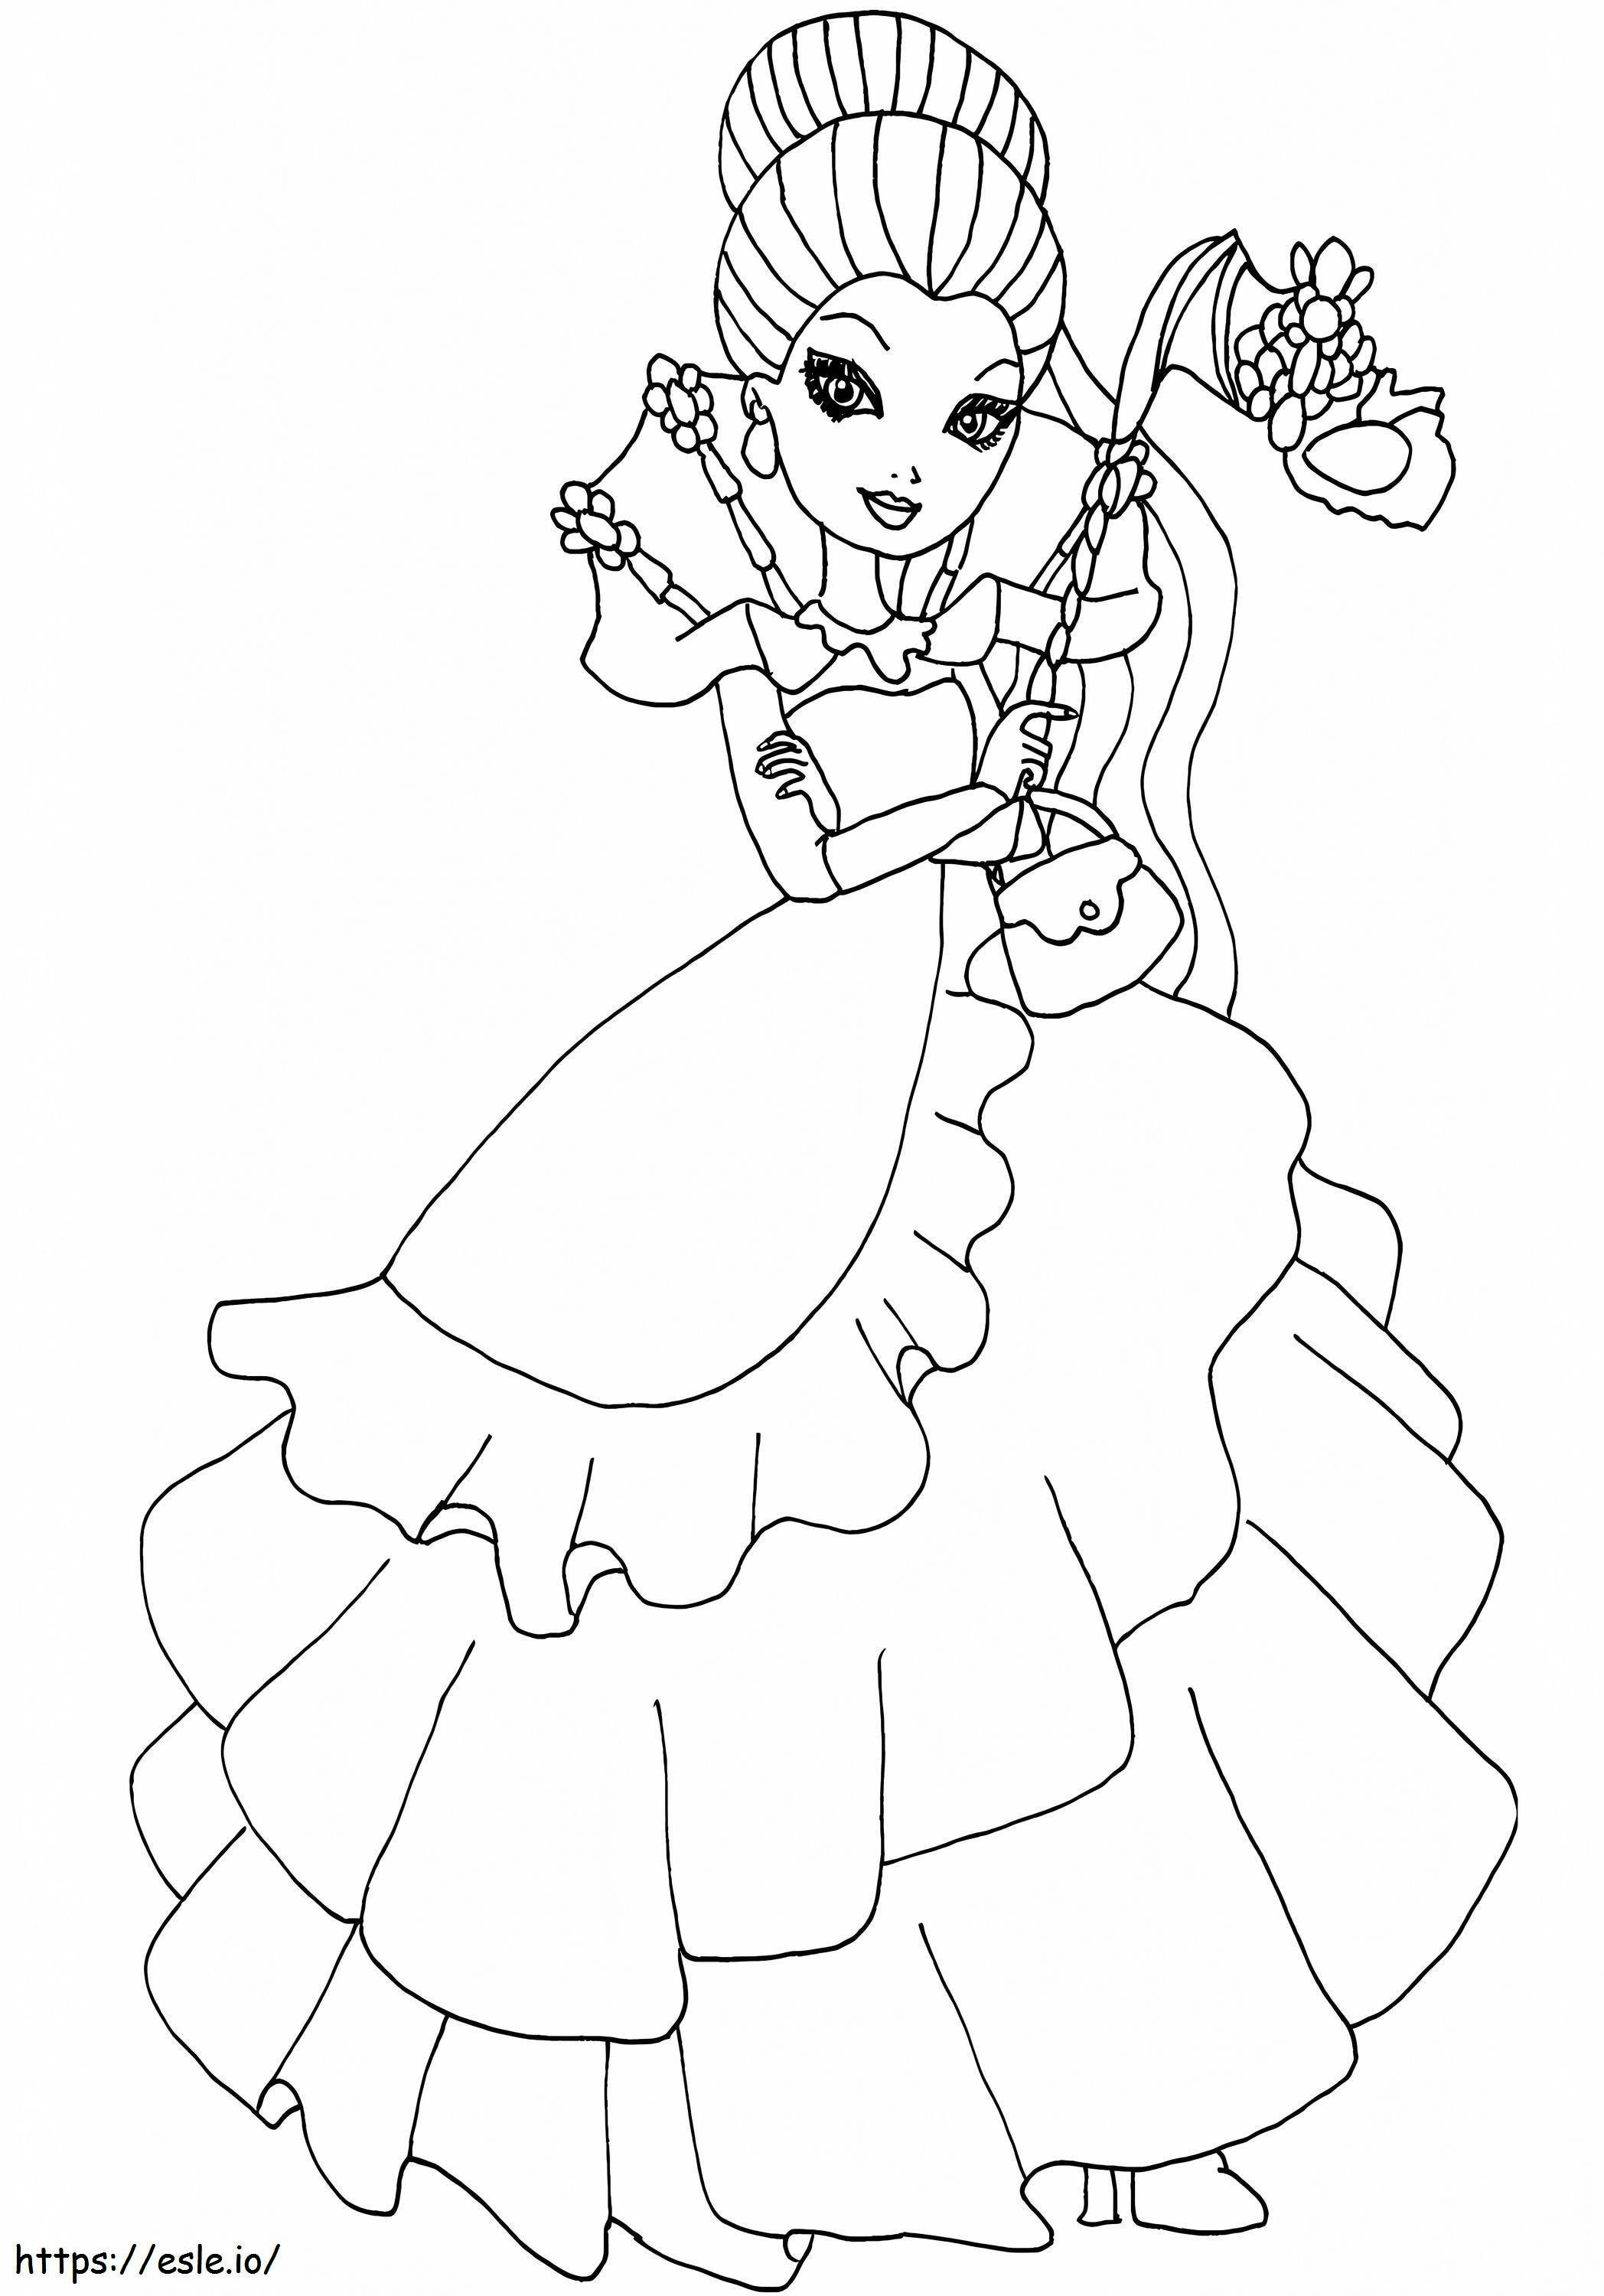 1578107777Ever After High Thronecoming Raven Queen coloring page